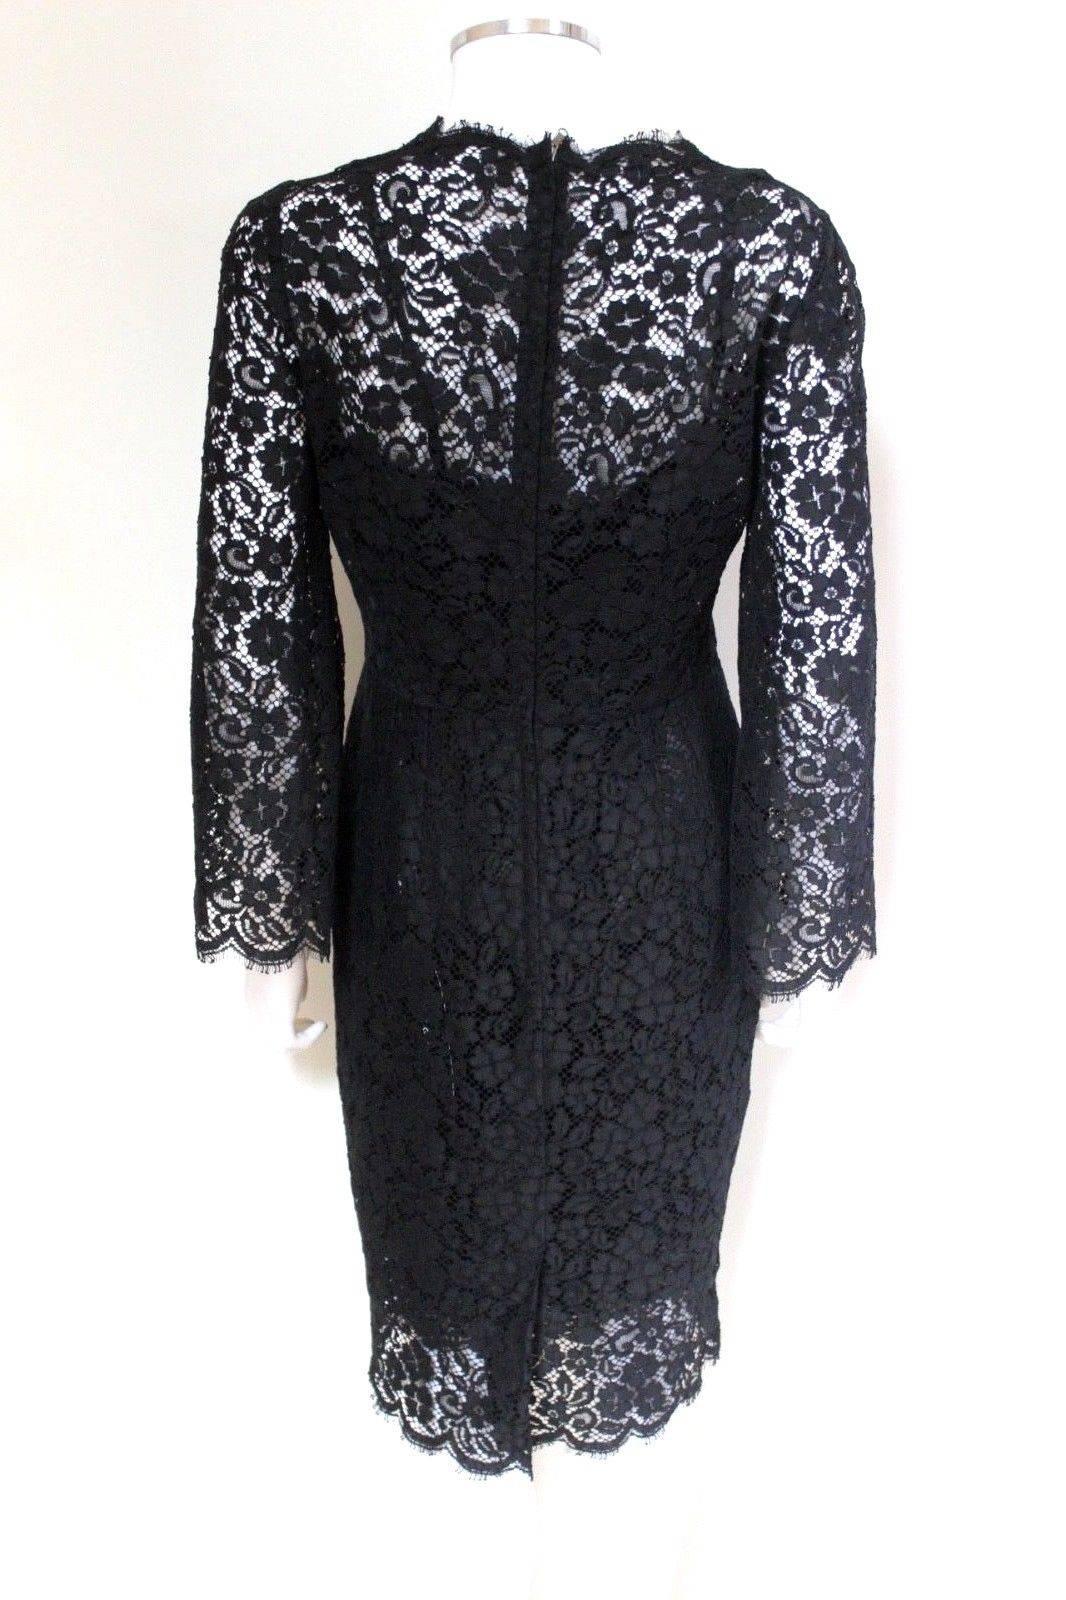 New £1983 Dolce and Gabbana Black Lace Overlay Dress Italian 44 uk 12 For Sale 1